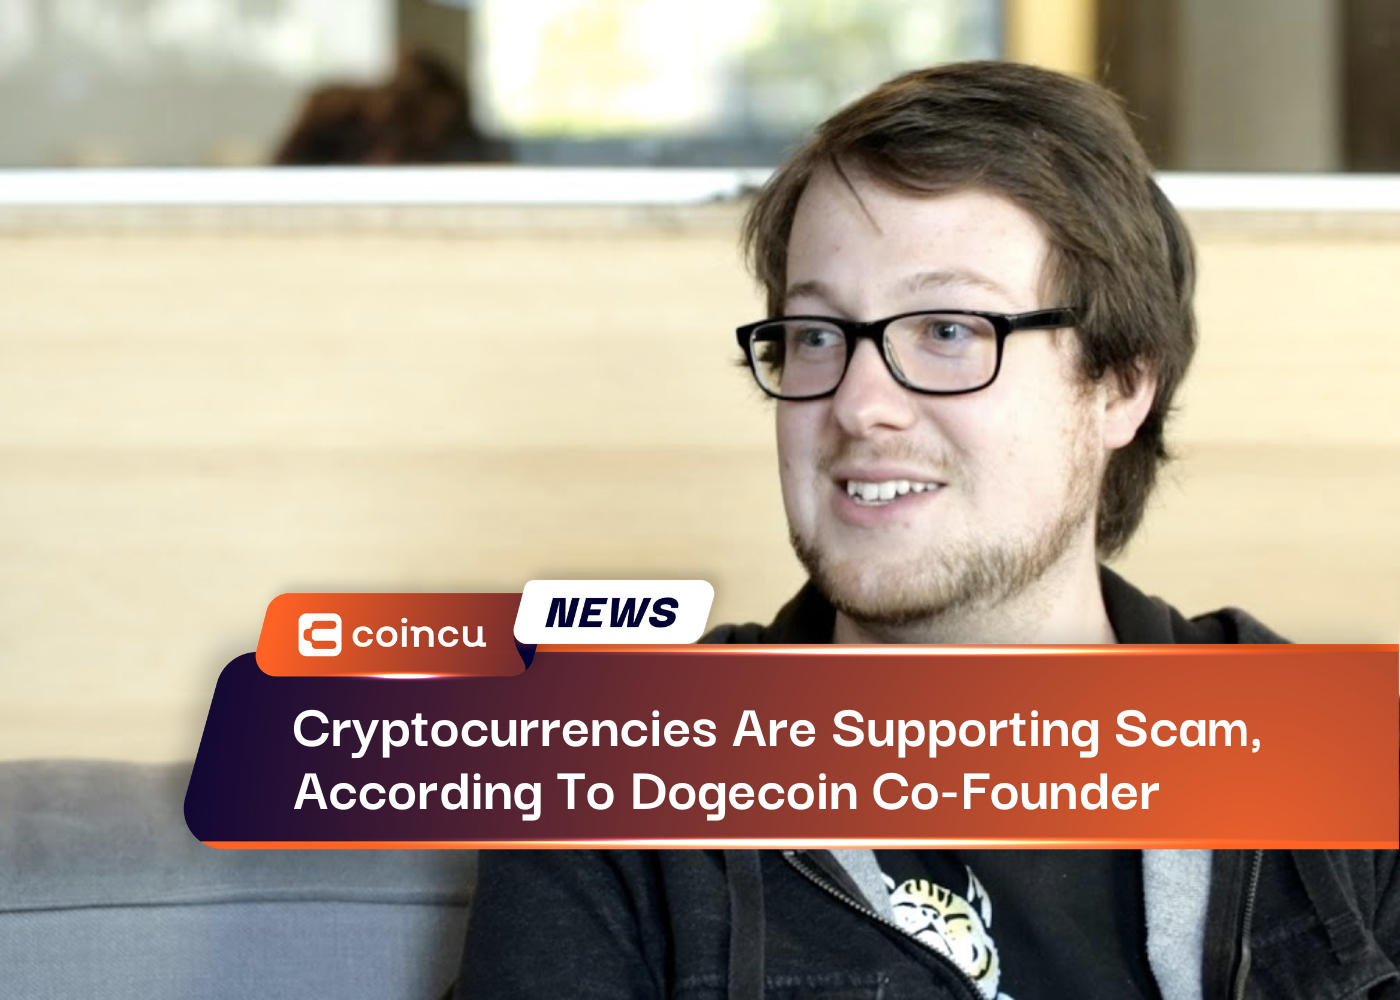 Cryptocurrencies Are Supporting Scam, According To Dogecoin Co-Founder